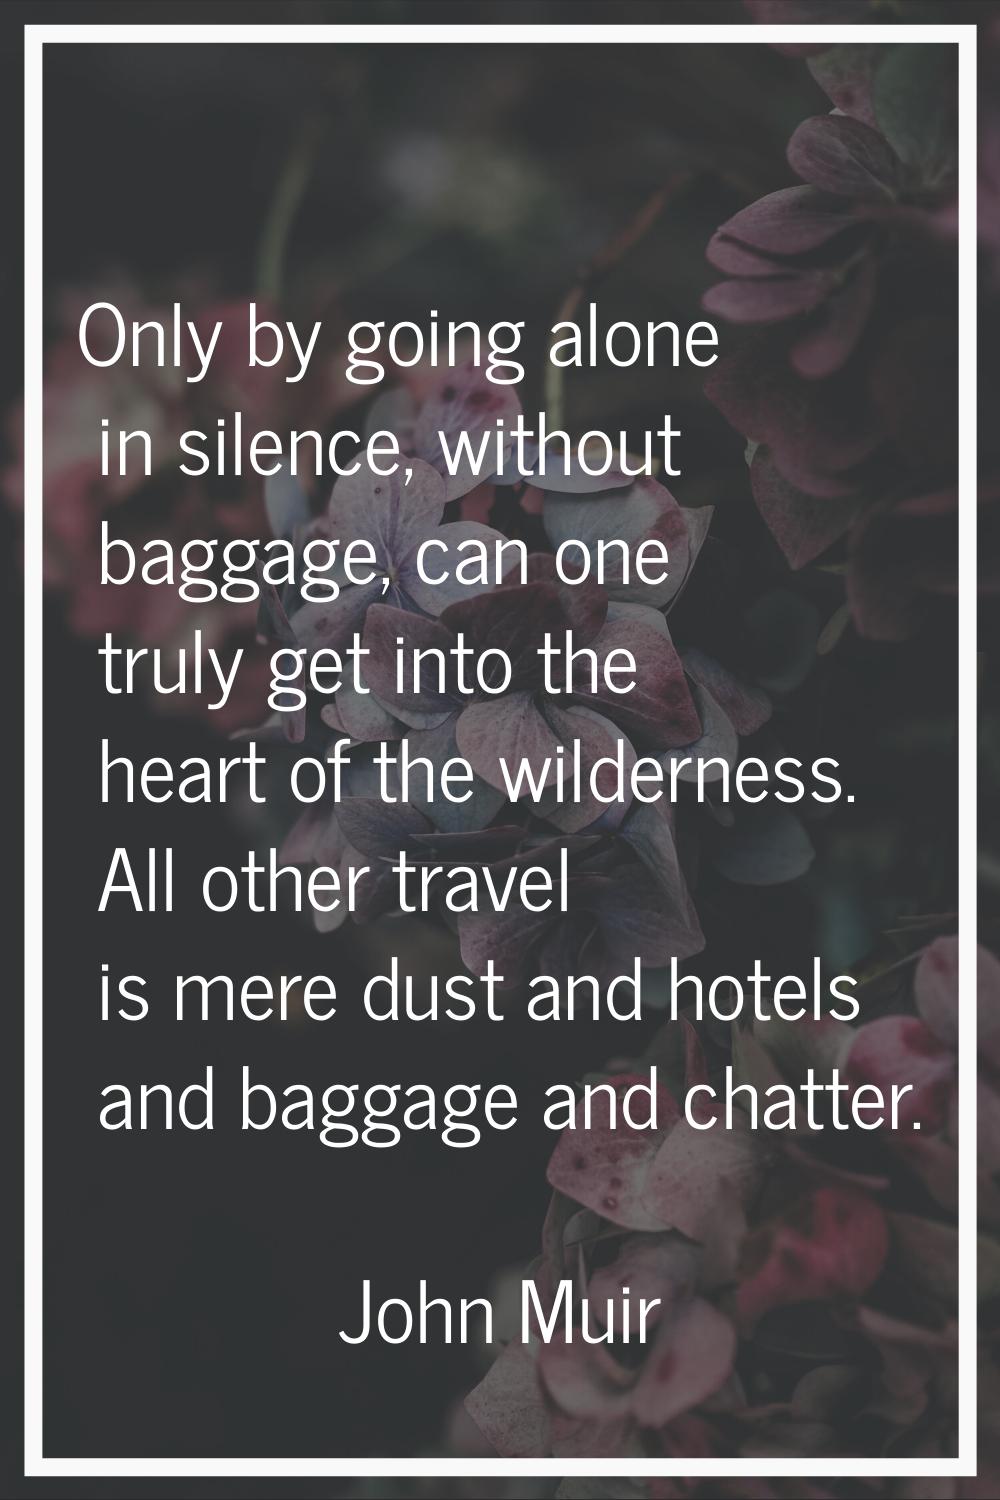 Only by going alone in silence, without baggage, can one truly get into the heart of the wilderness